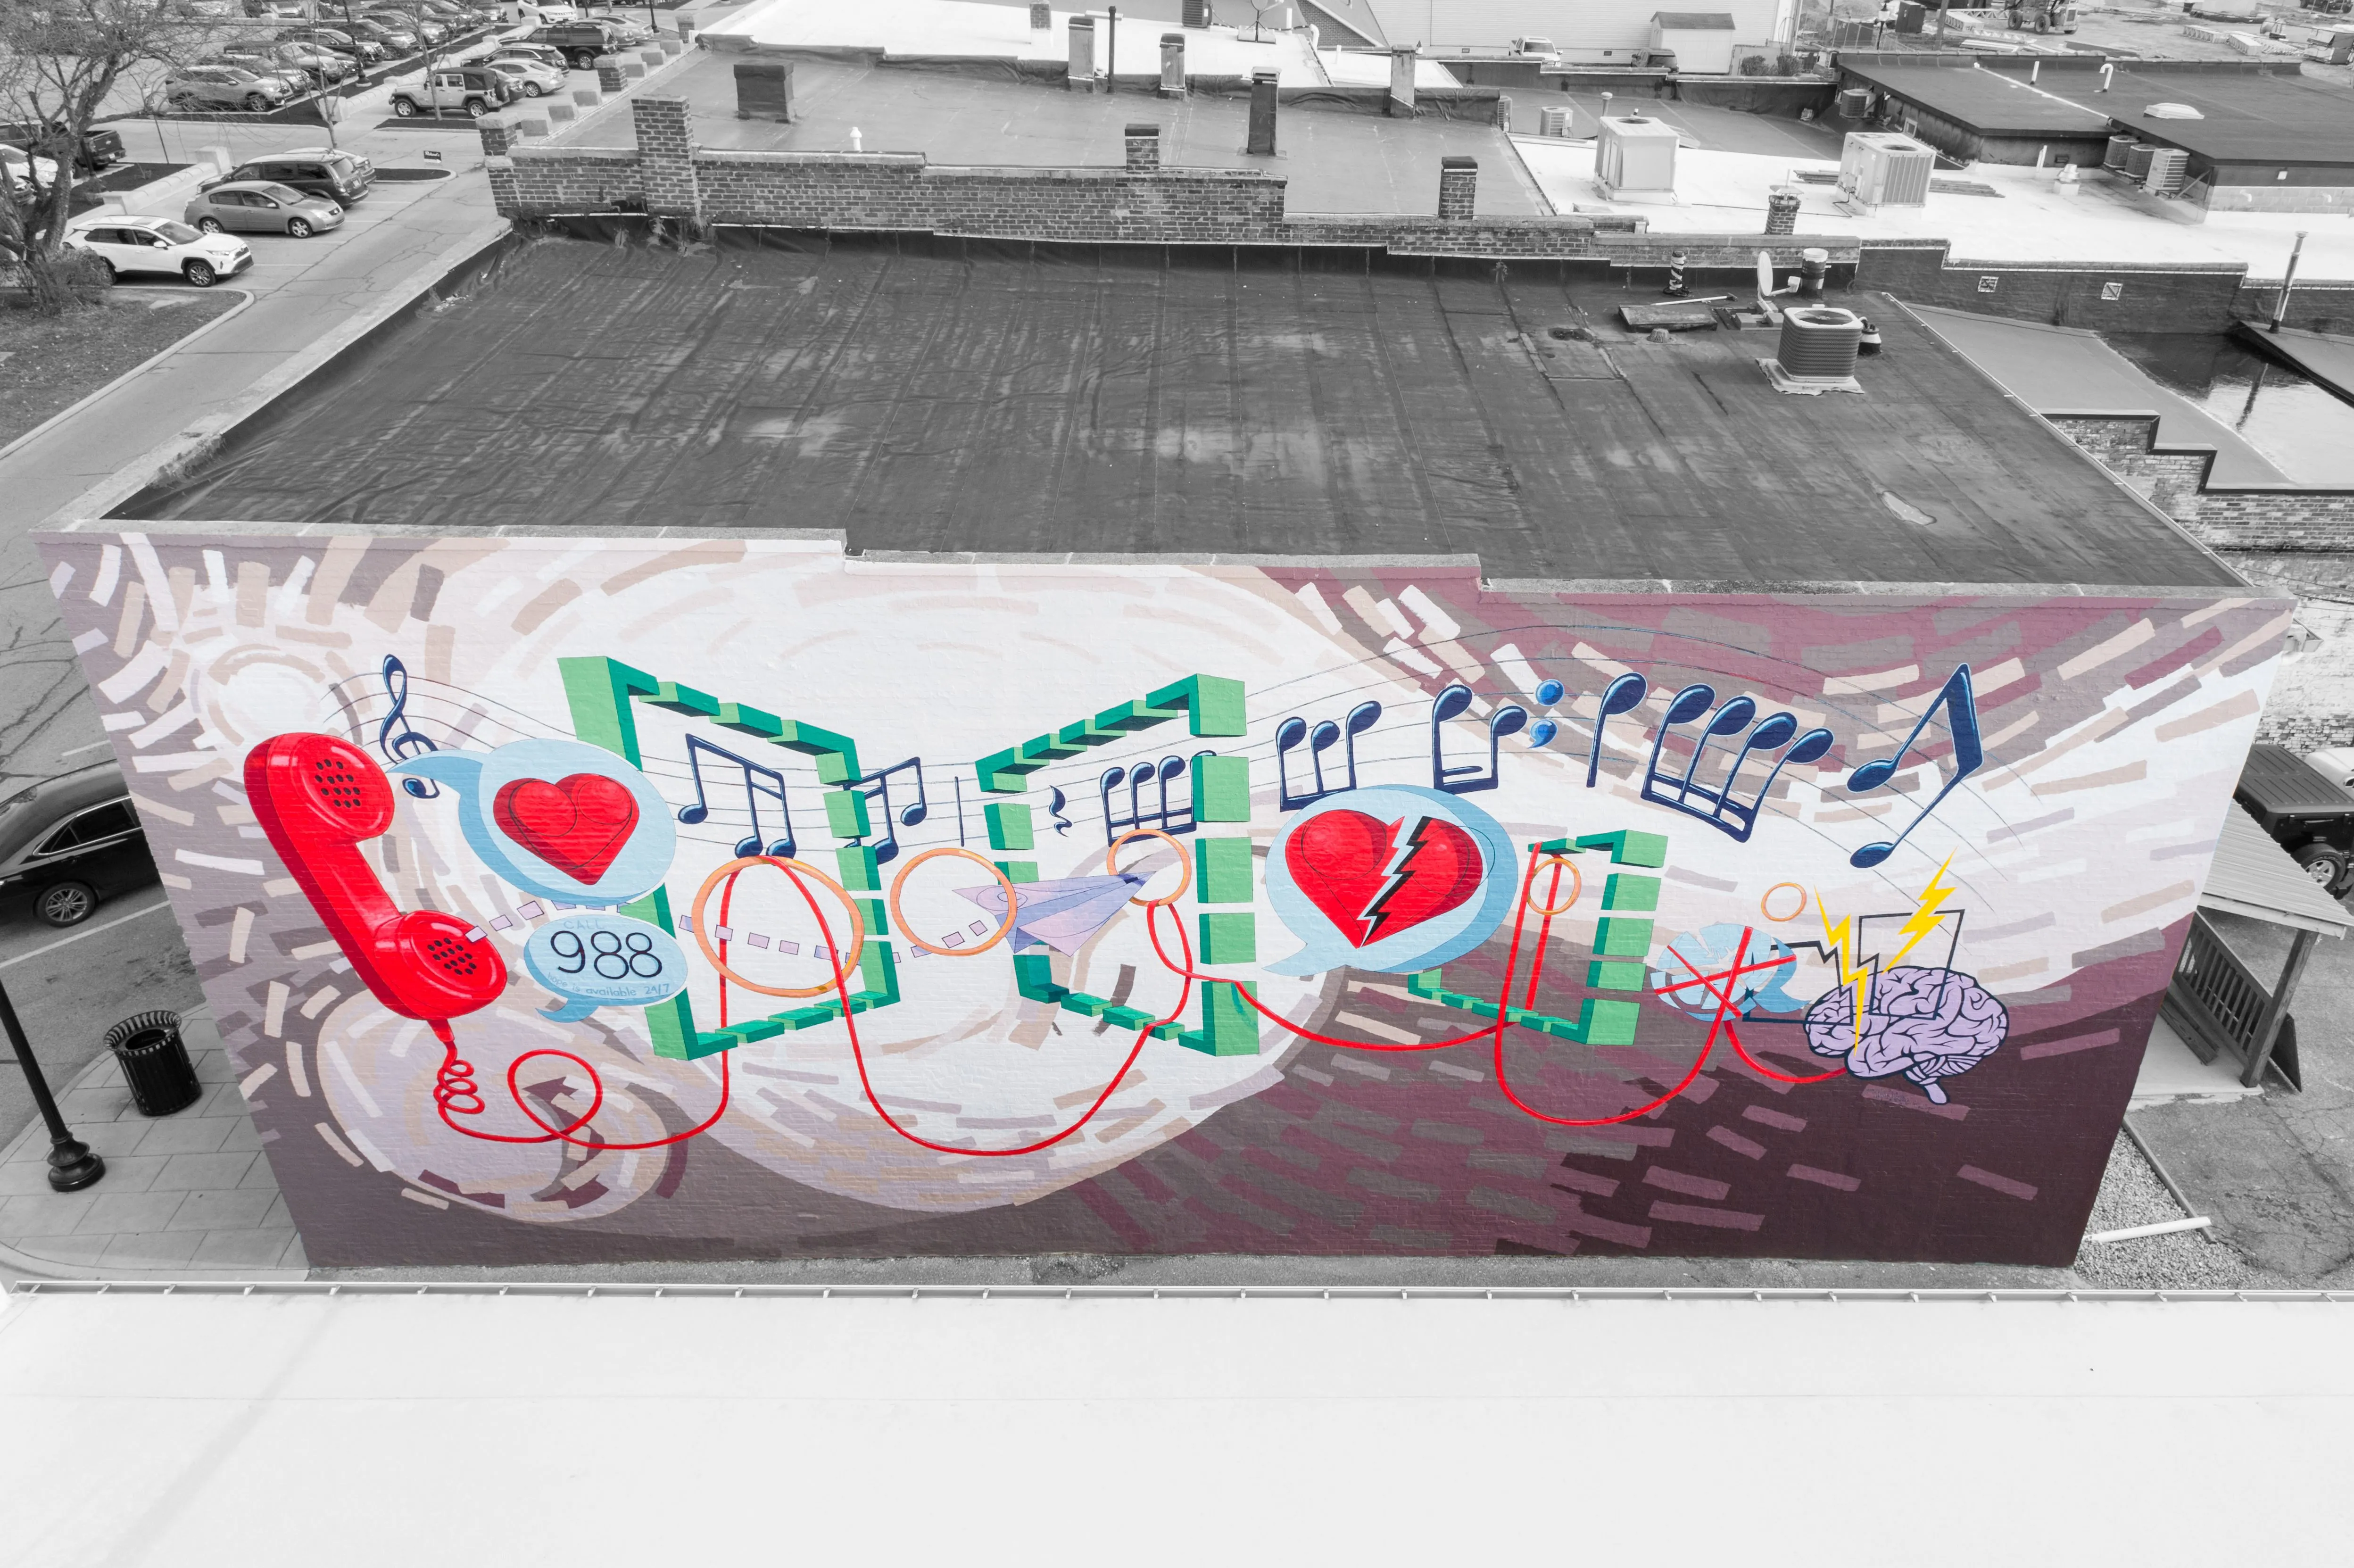 Colorful mural on a building's facade in an urban environment, with musical and heart symbols, in a black and white cityscape.